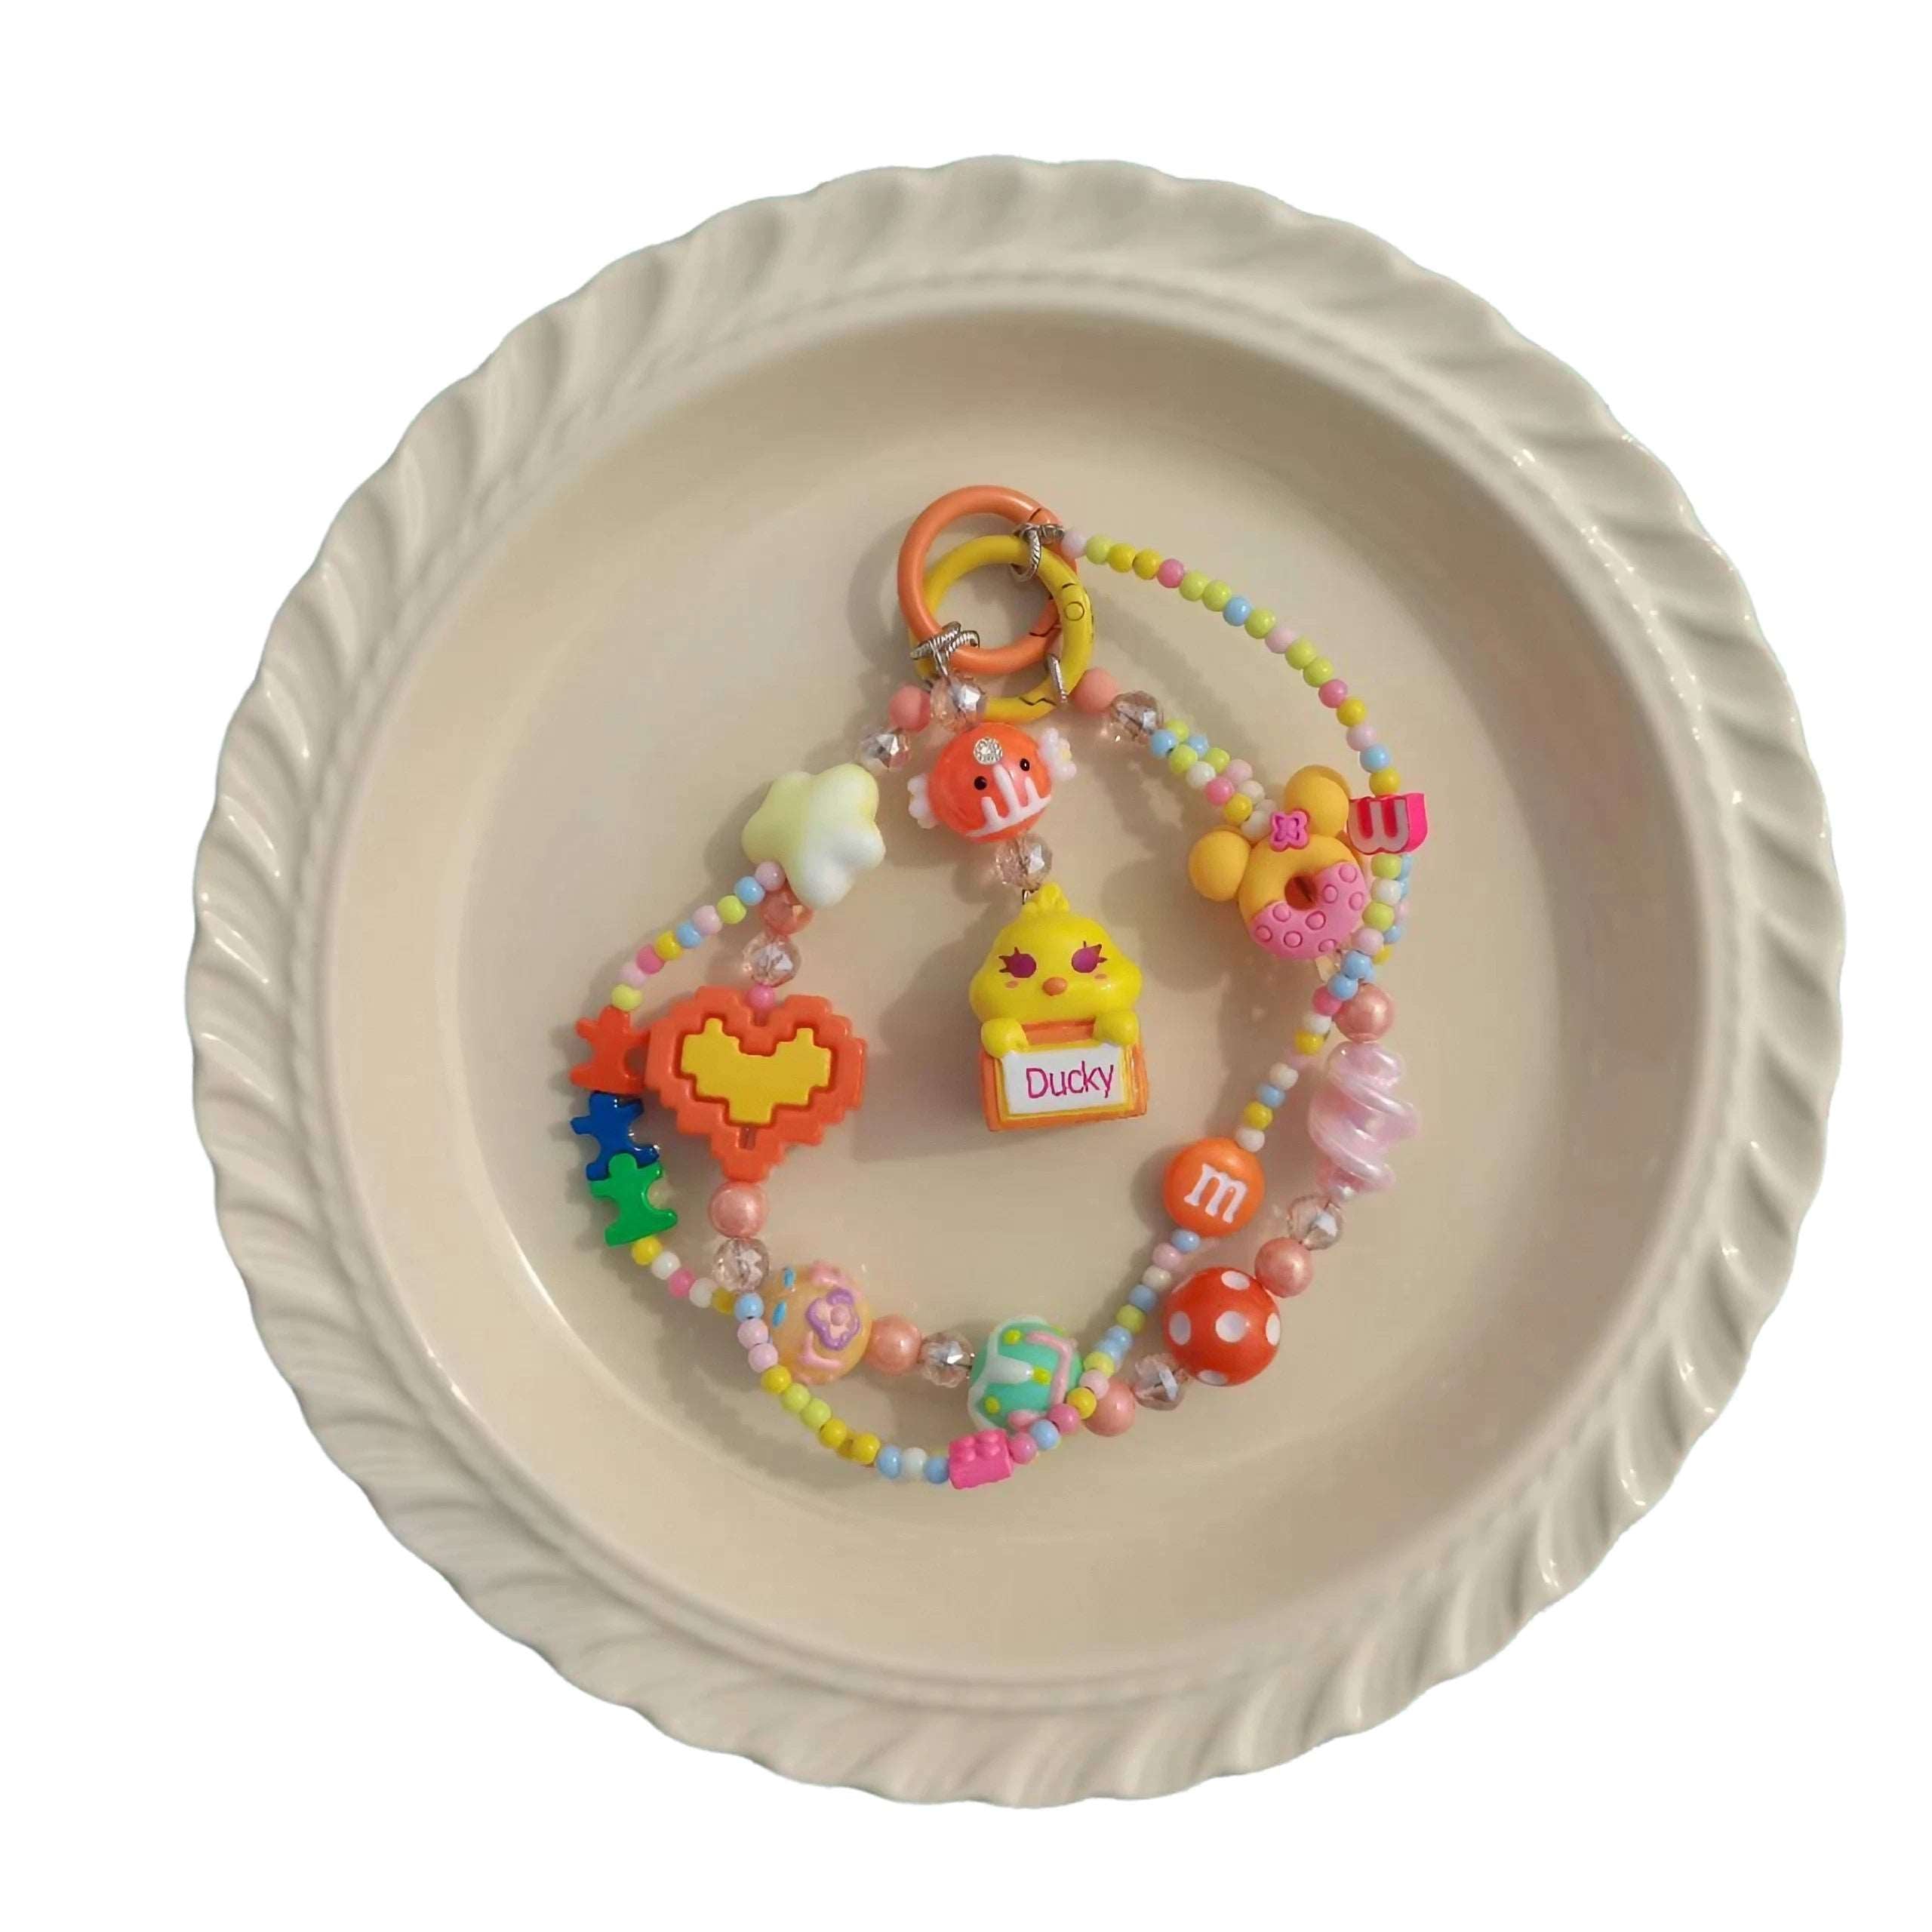 An array of colorful, handmade accessory beads spread out on a white plate